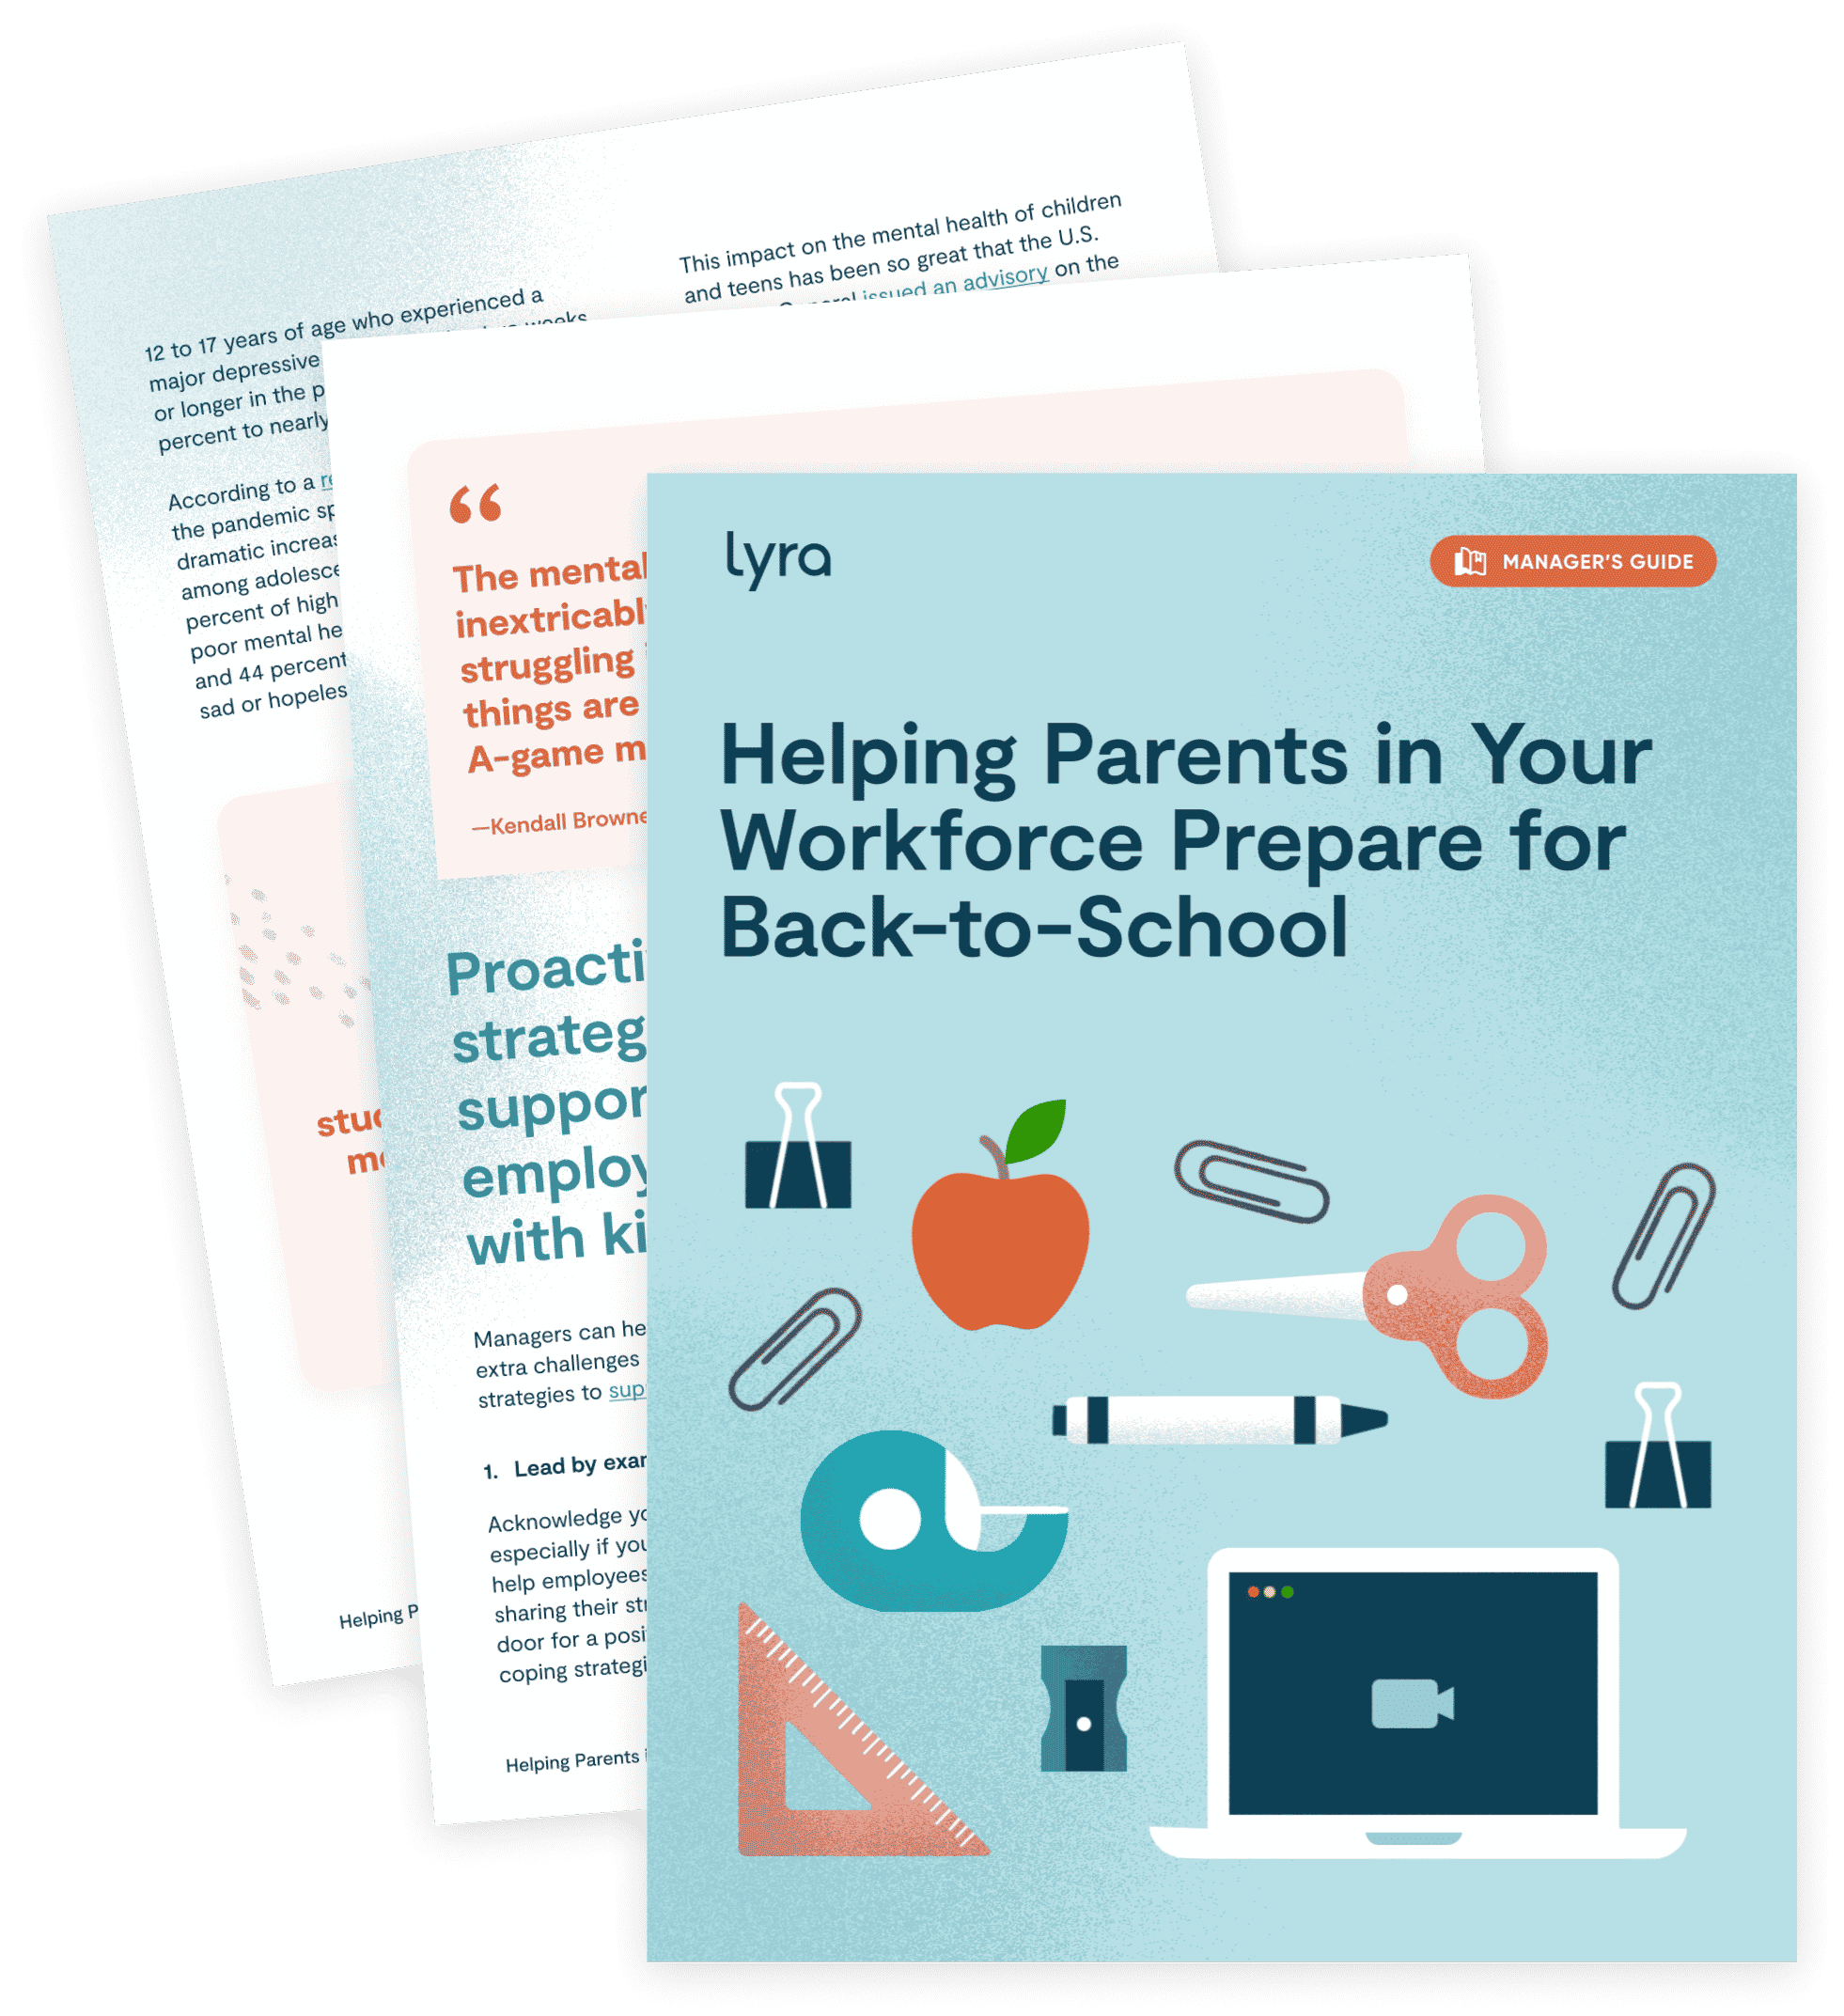 Manager’s Guide: Helping Parents in your Workforce Prepare for Back-to-School